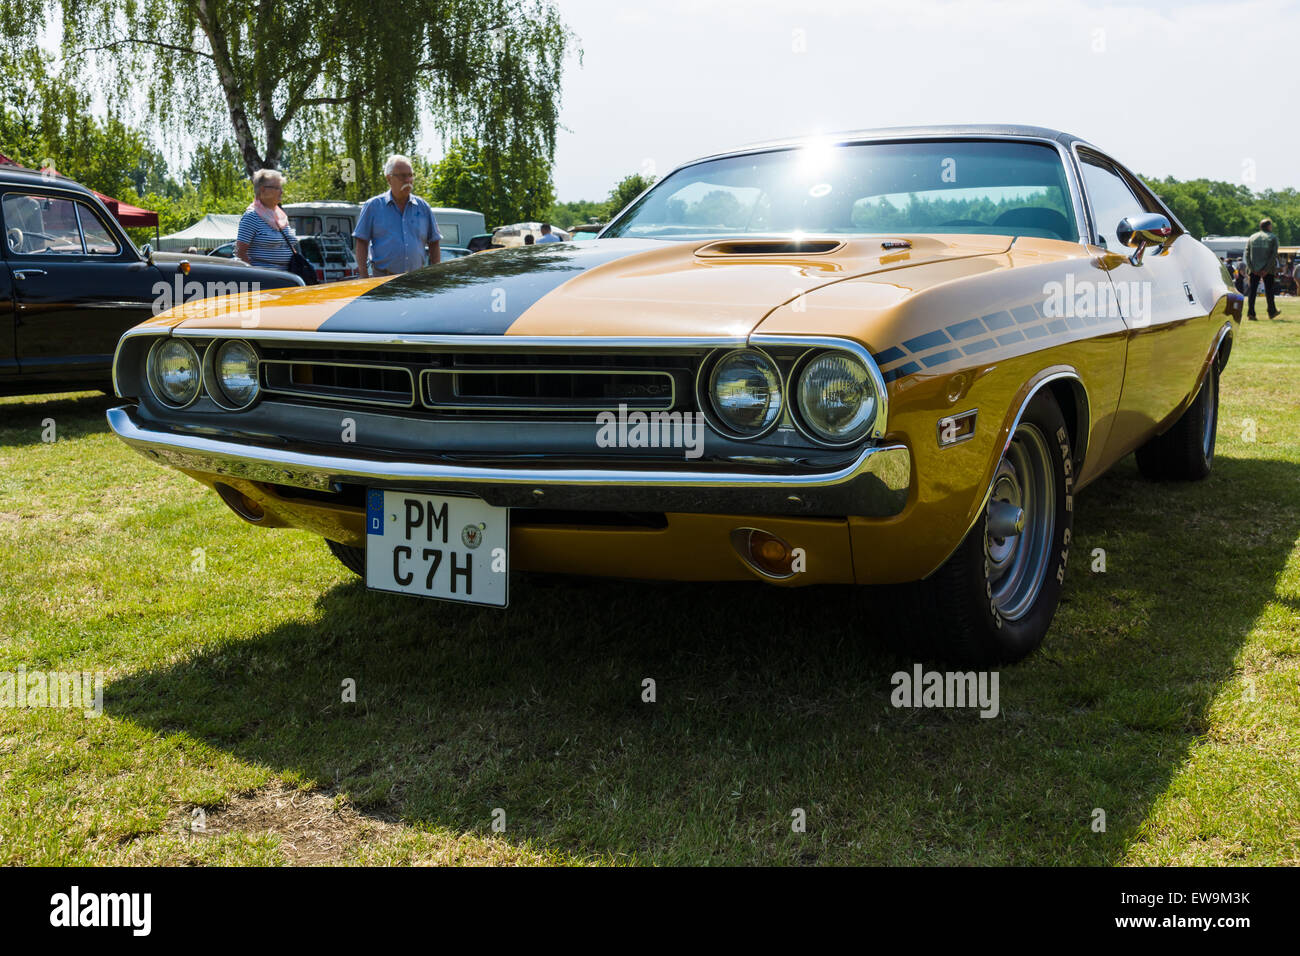 PAAREN IM GLIEN, GERMANY - MAY 23, 2015: Mid-size pony car Dodge Challenger, 1974. The oldtimer show in MAFZ. Stock Photo